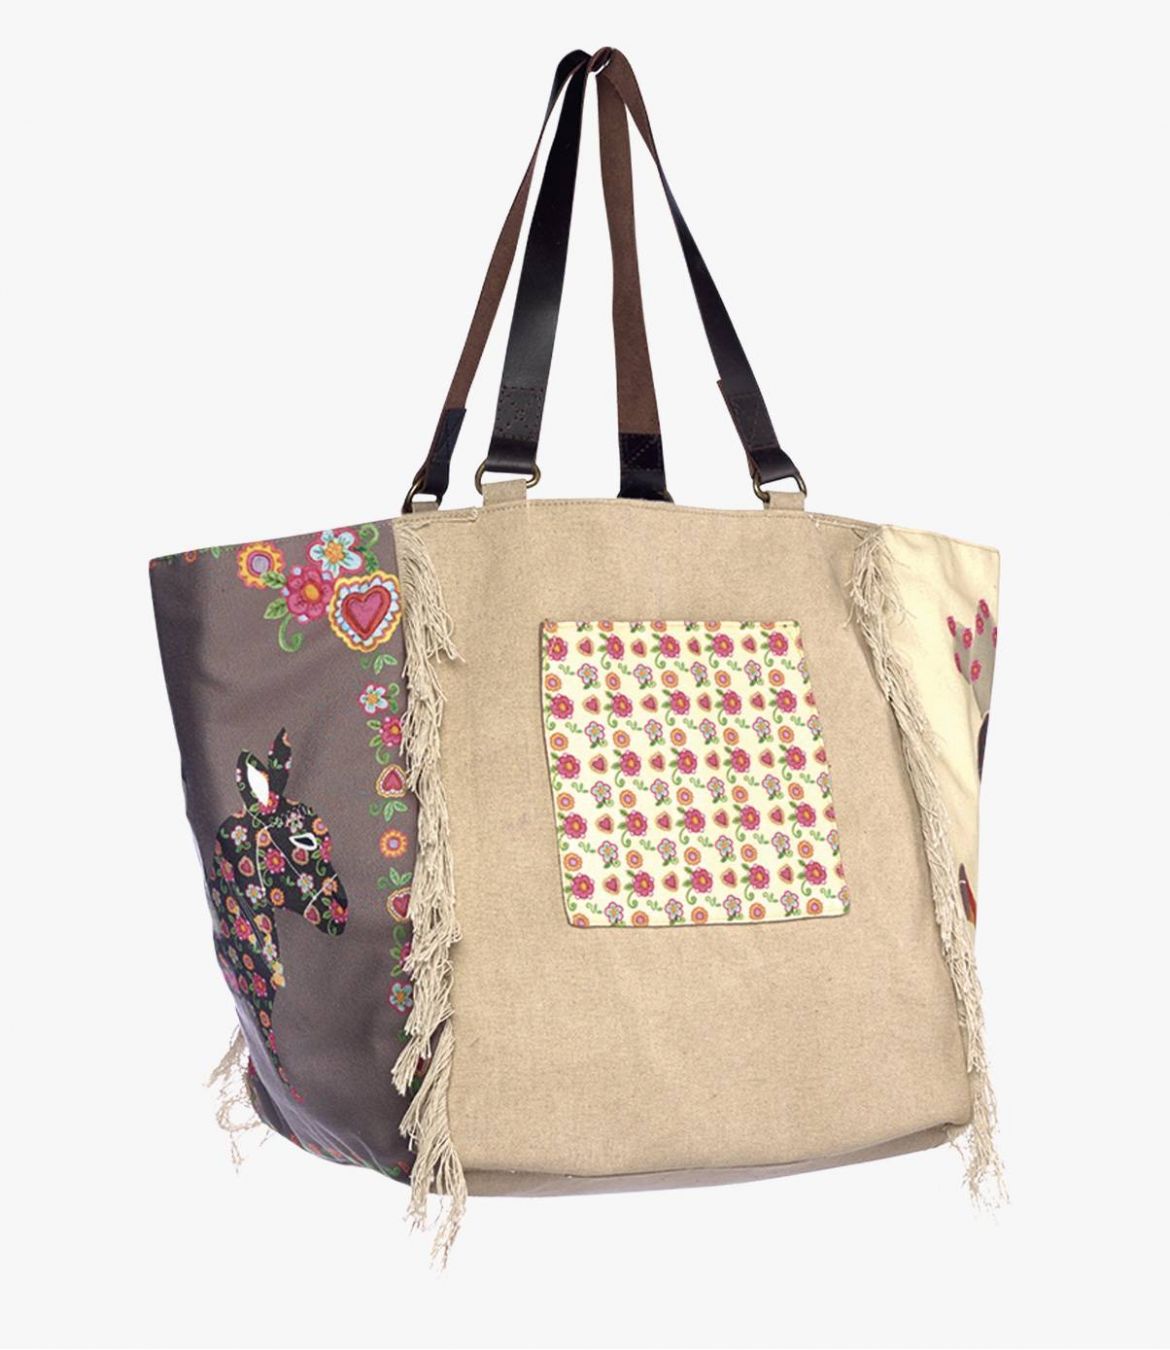 TOTE PENNY Polyester Bag, Cotton, Women's Leather 30 x 30 x 35 cm Storiatipic - 1